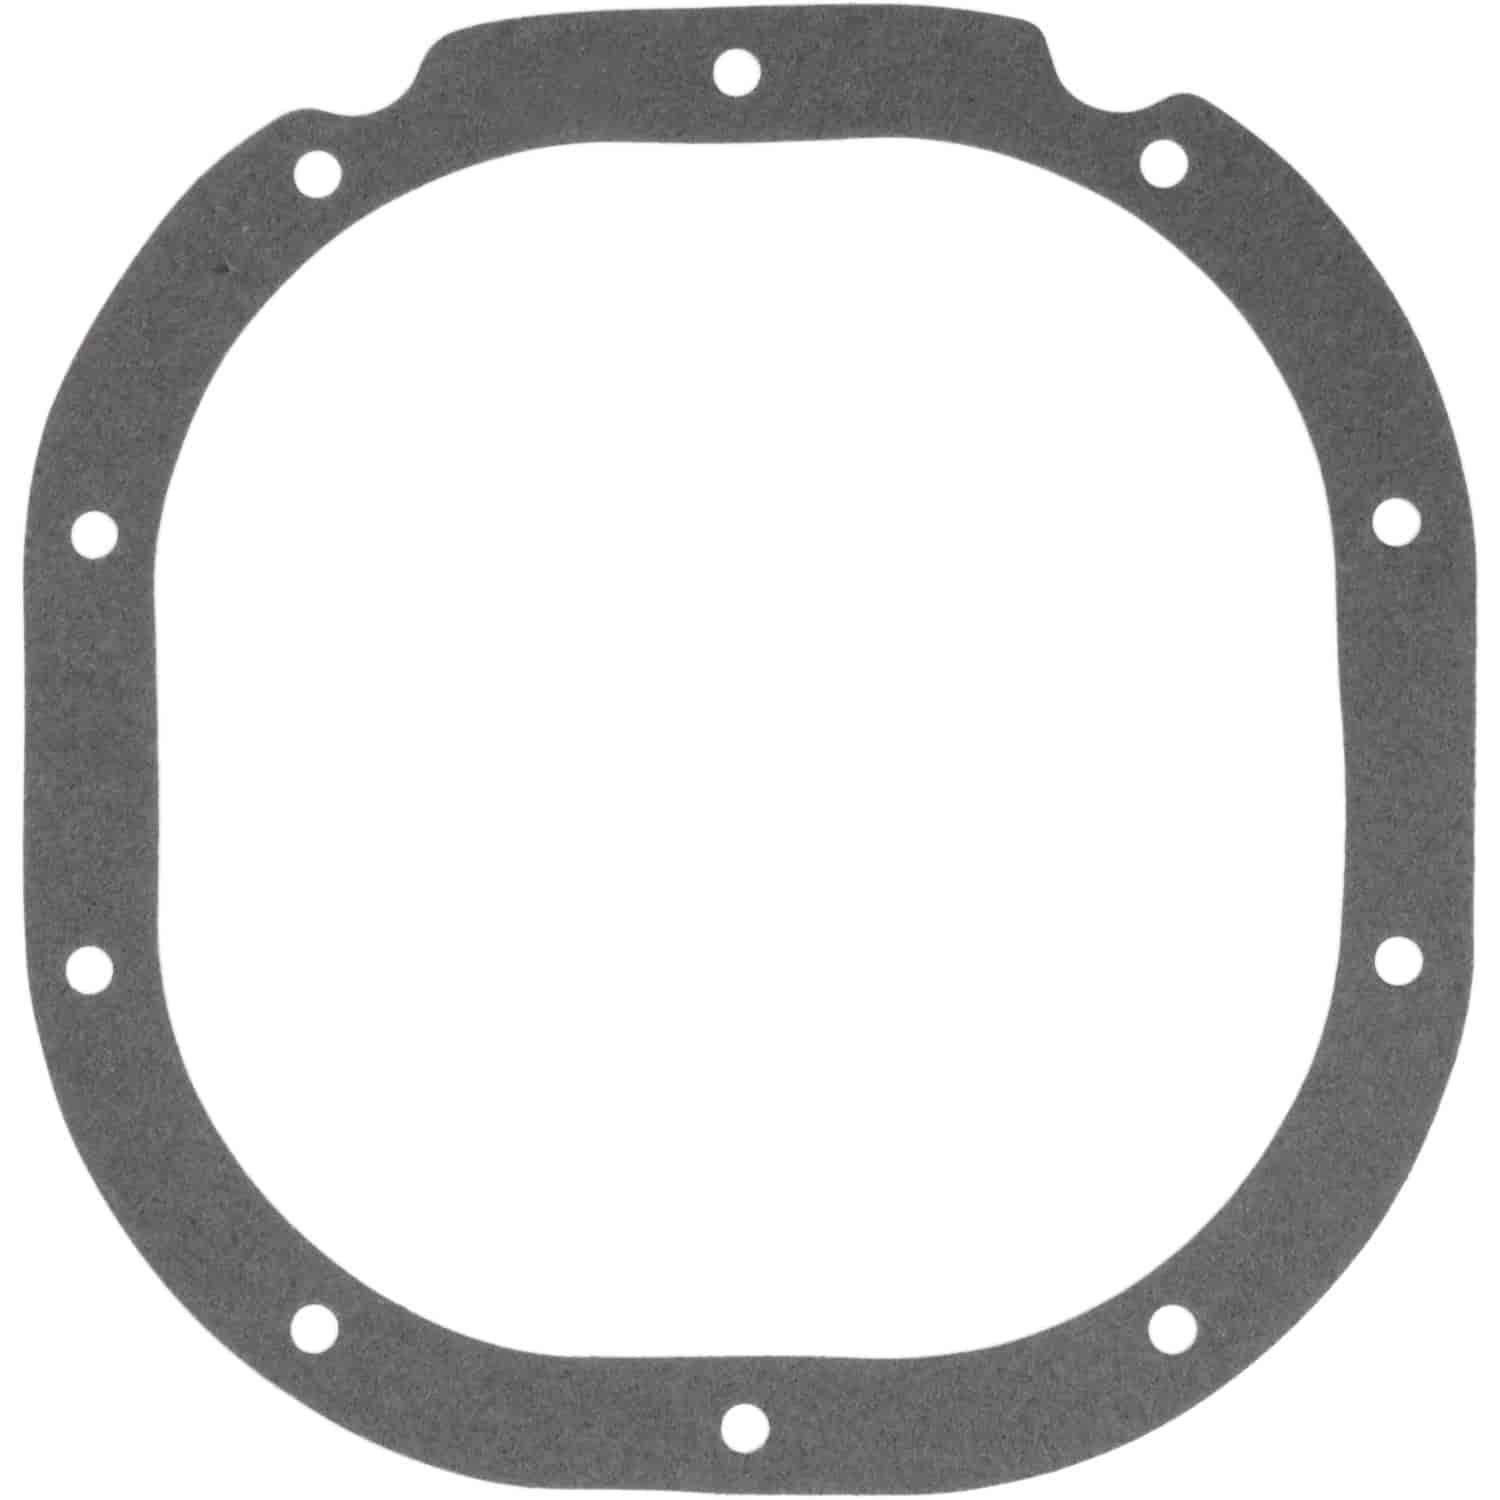 Differential Cover Gasket Ford 10-Bolt (8.8" Ring Gear)